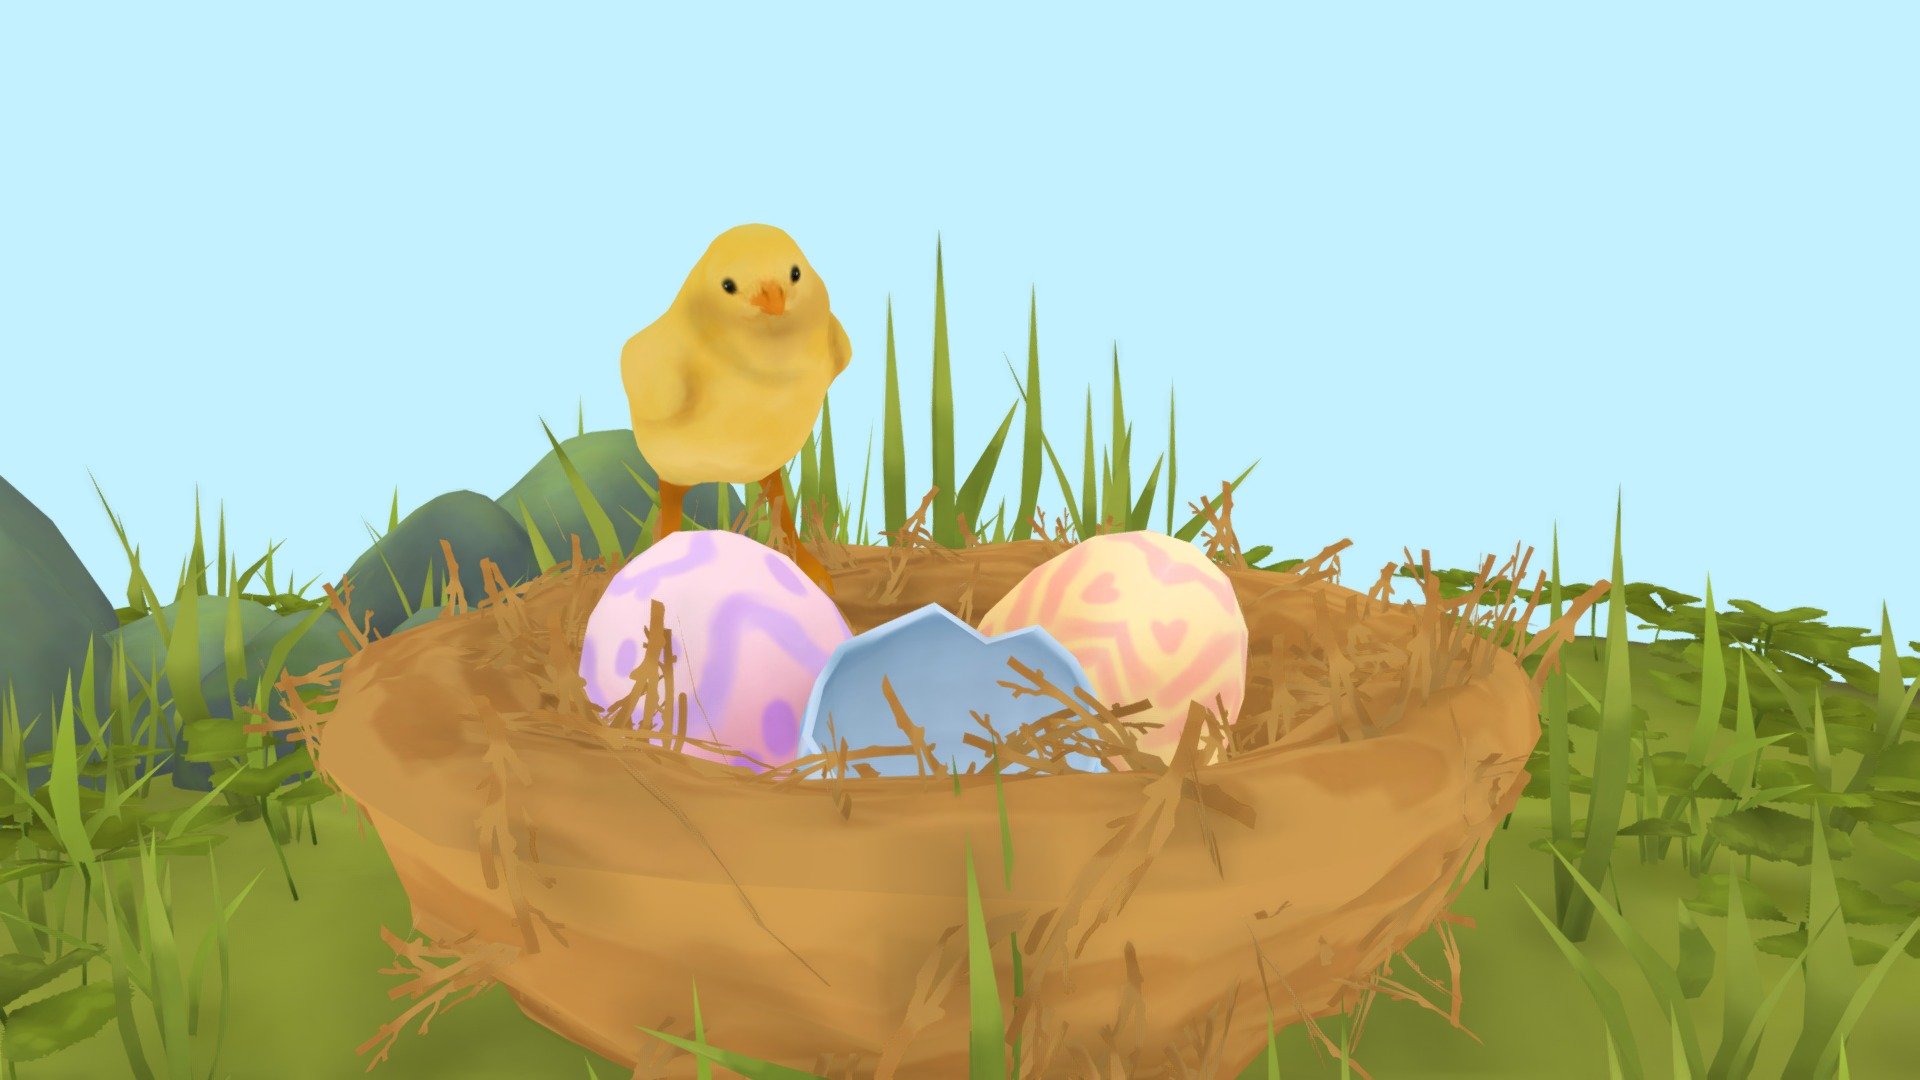 Handpainted model using blender of some easter eggs in a nest and a little chick :)

SketchfabWeeklyChallenge - Easter eggs - 3D model by Mewpet 3d model